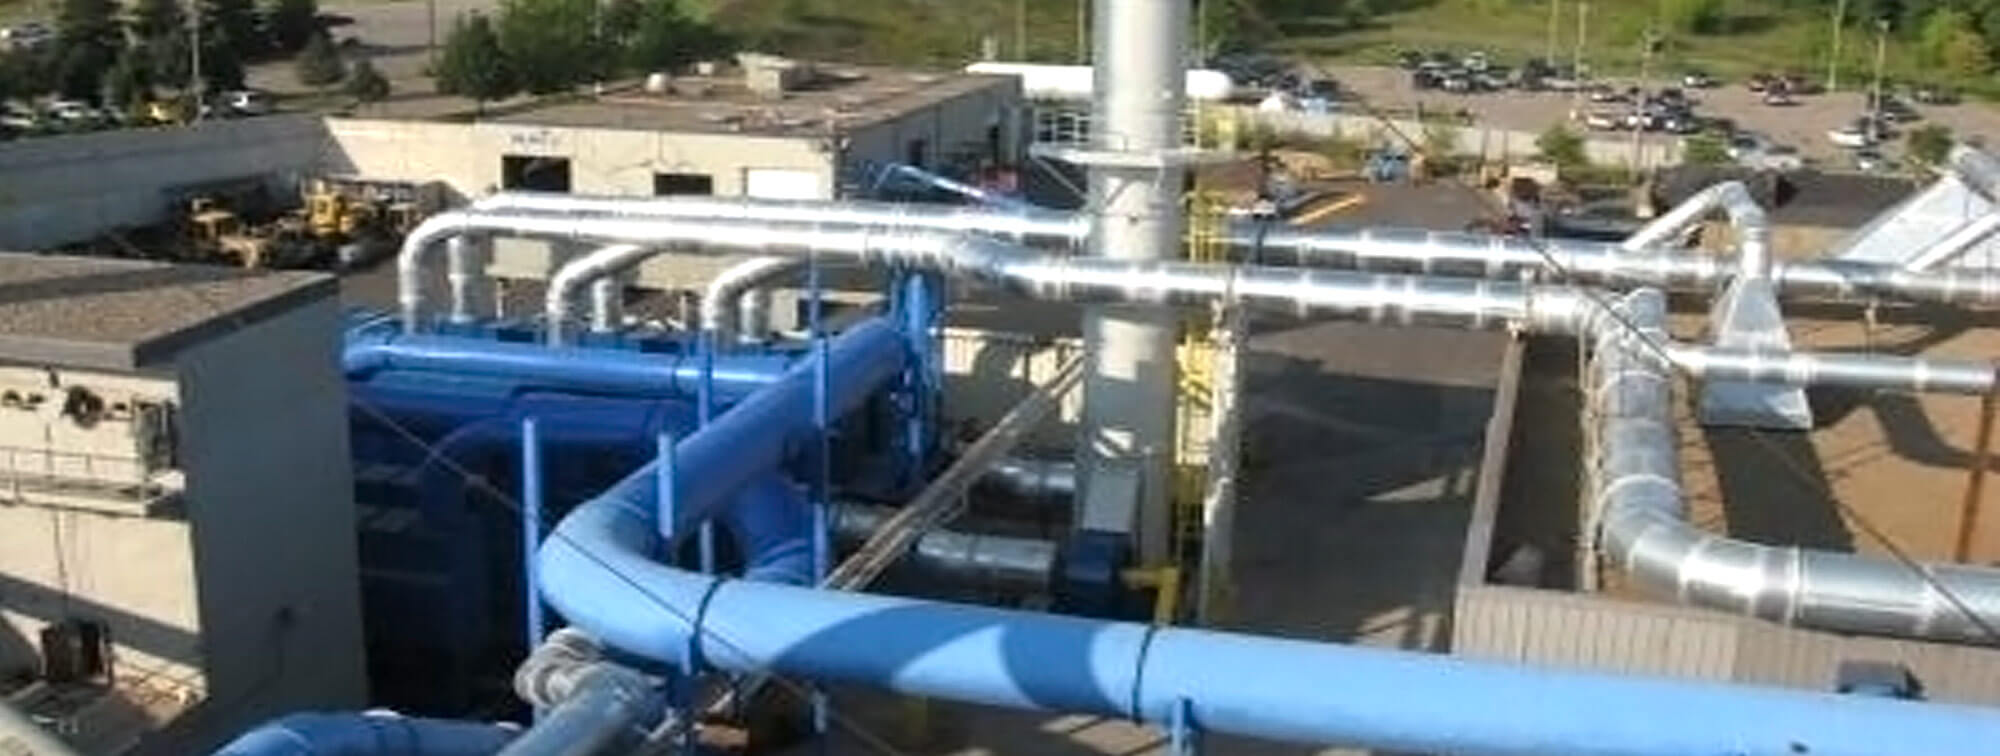 Aerial view of exterior ductwork for an industrial plant